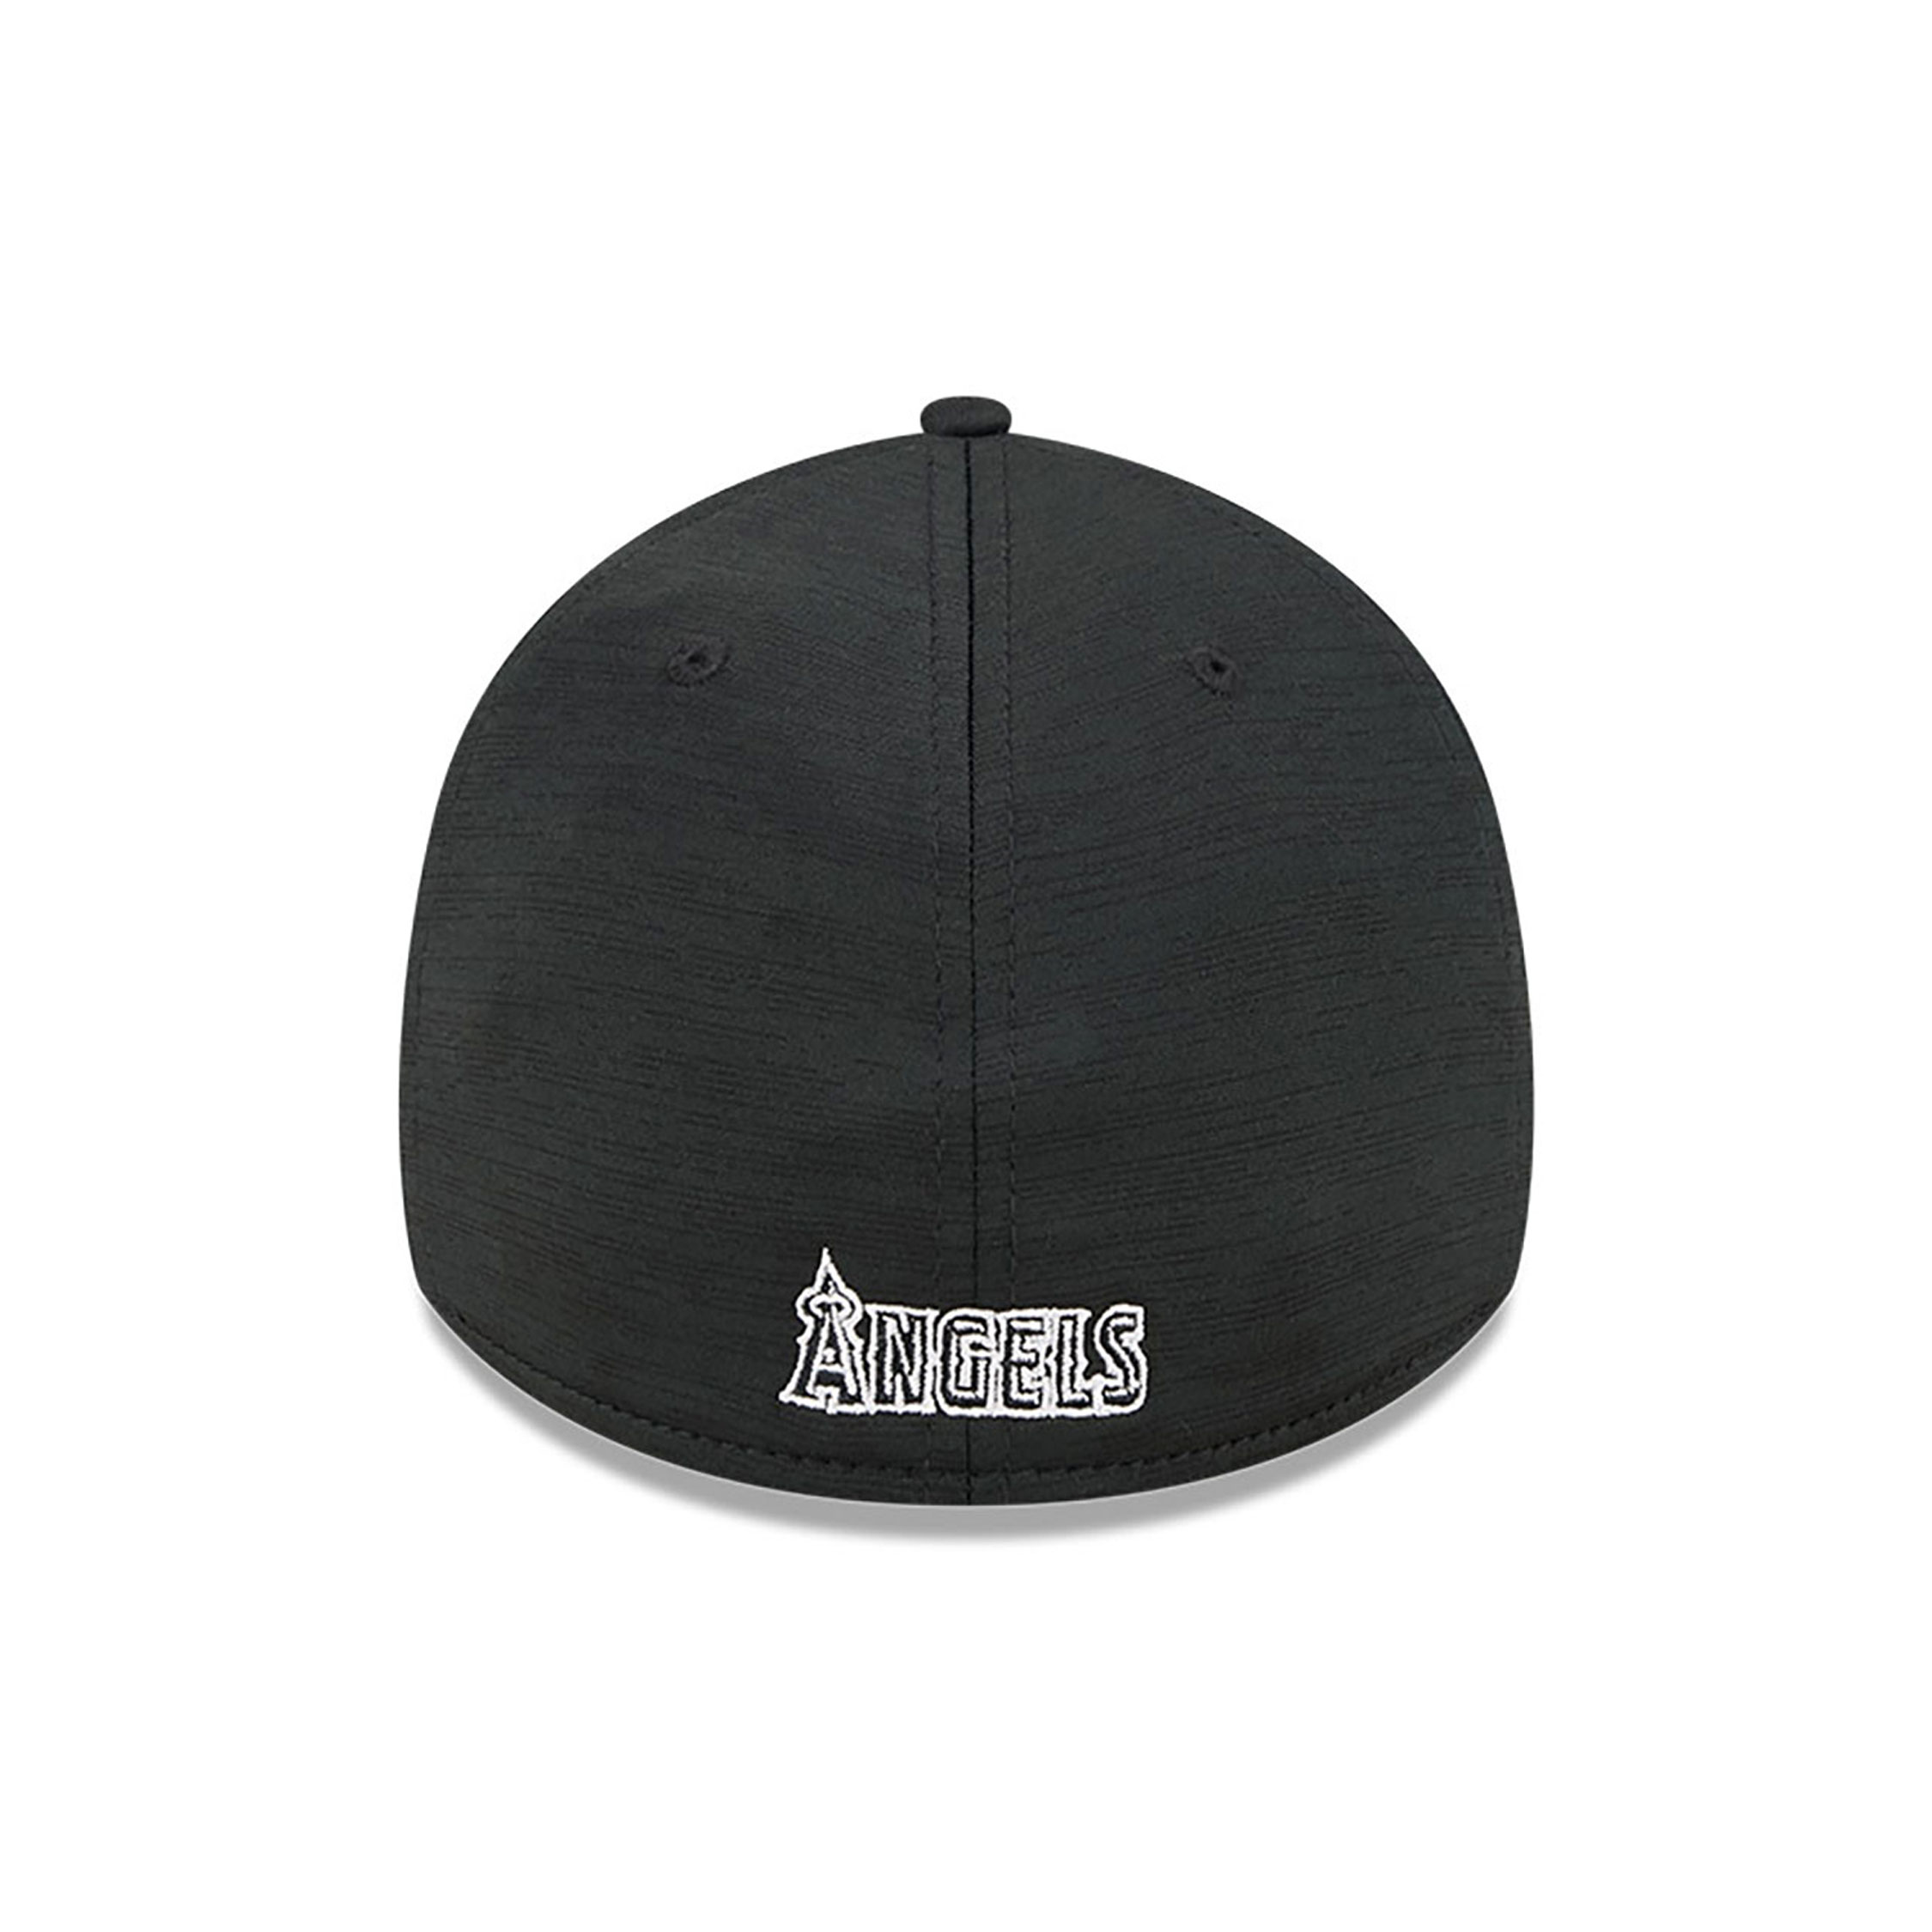 LA Angels Clubhouse Black 39THIRTY Stretch Fit Cap